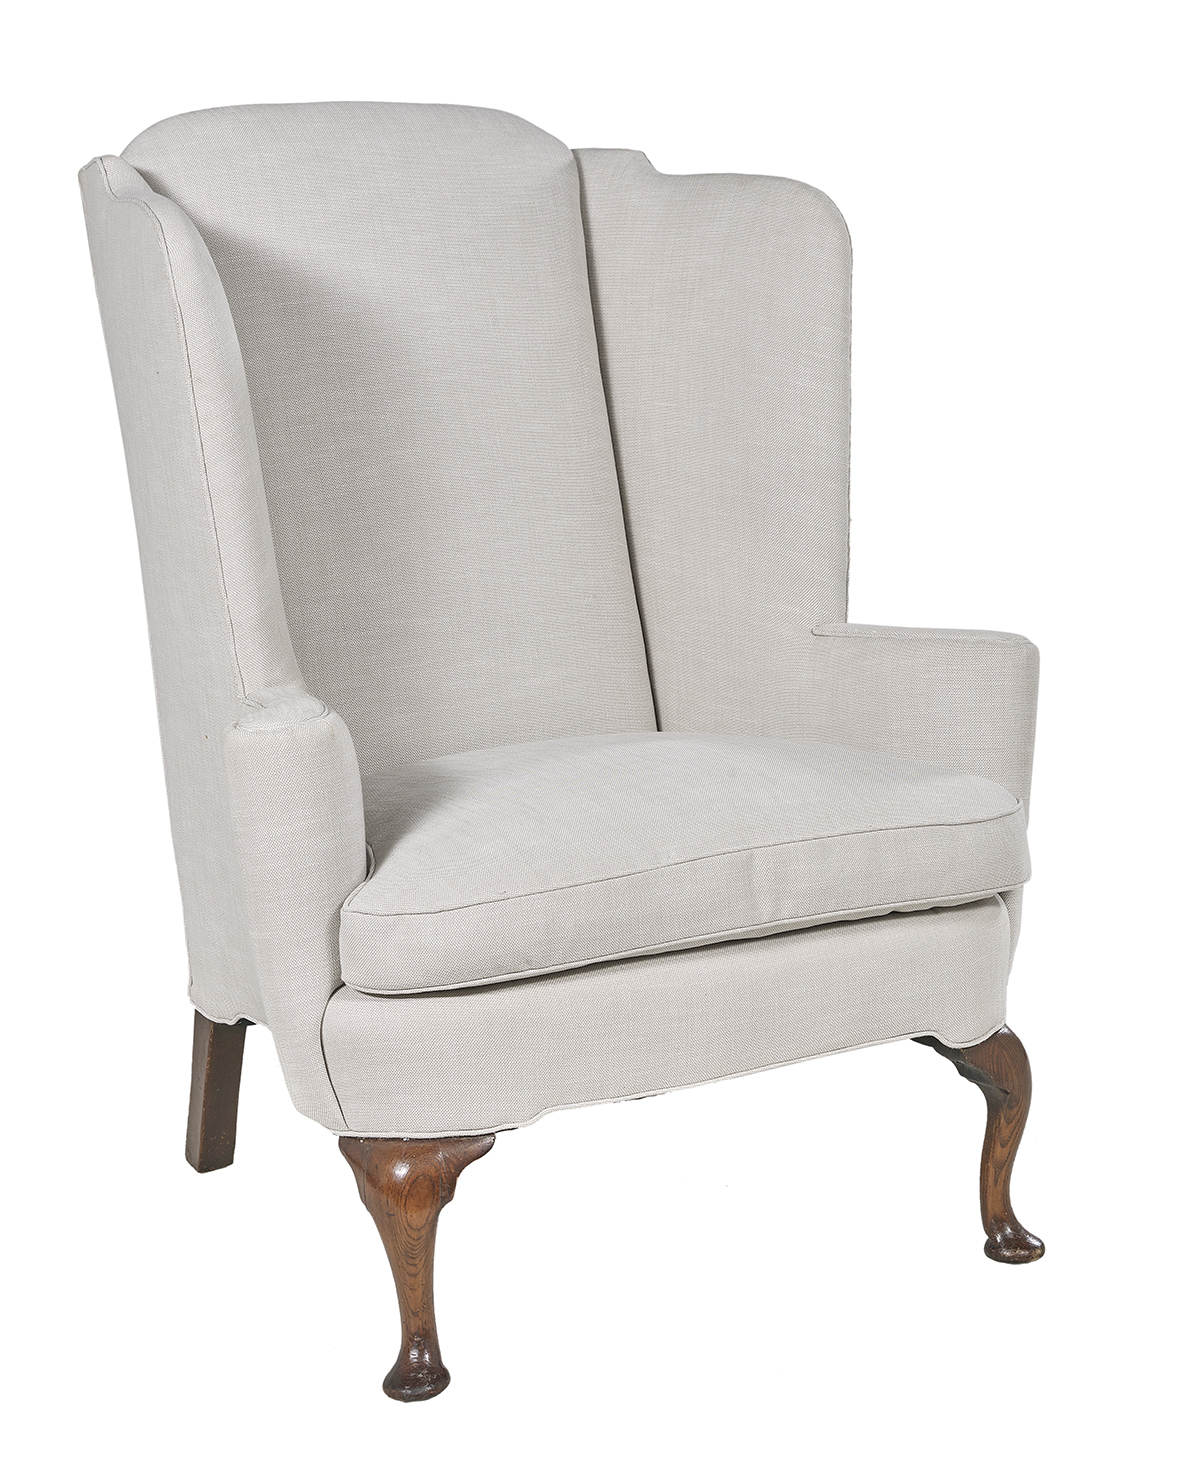 Queen Anne Elmwood Wing Chair - Image 2 of 2